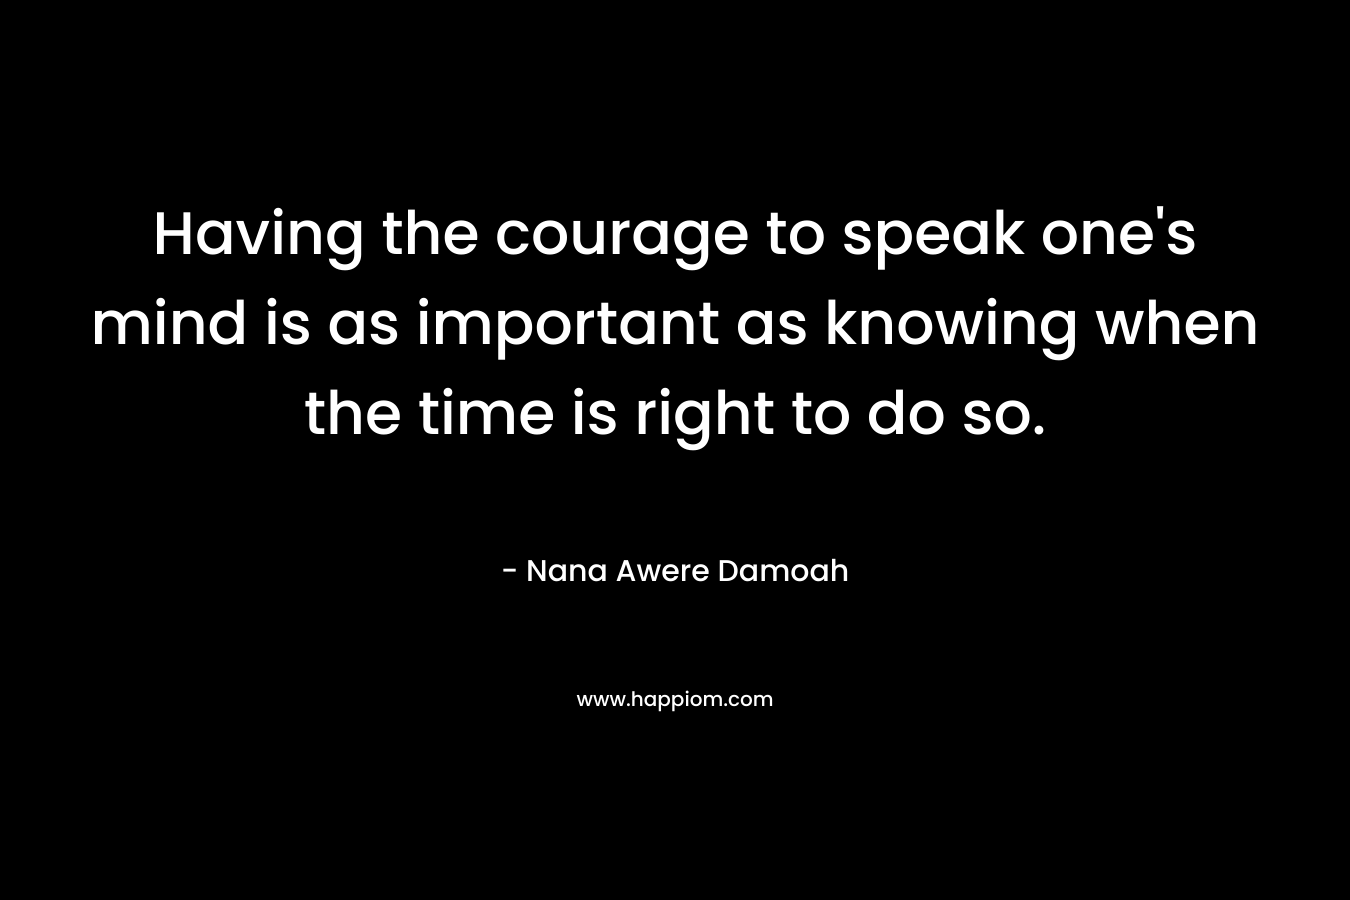 Having the courage to speak one’s mind is as important as knowing when the time is right to do so. – Nana Awere Damoah